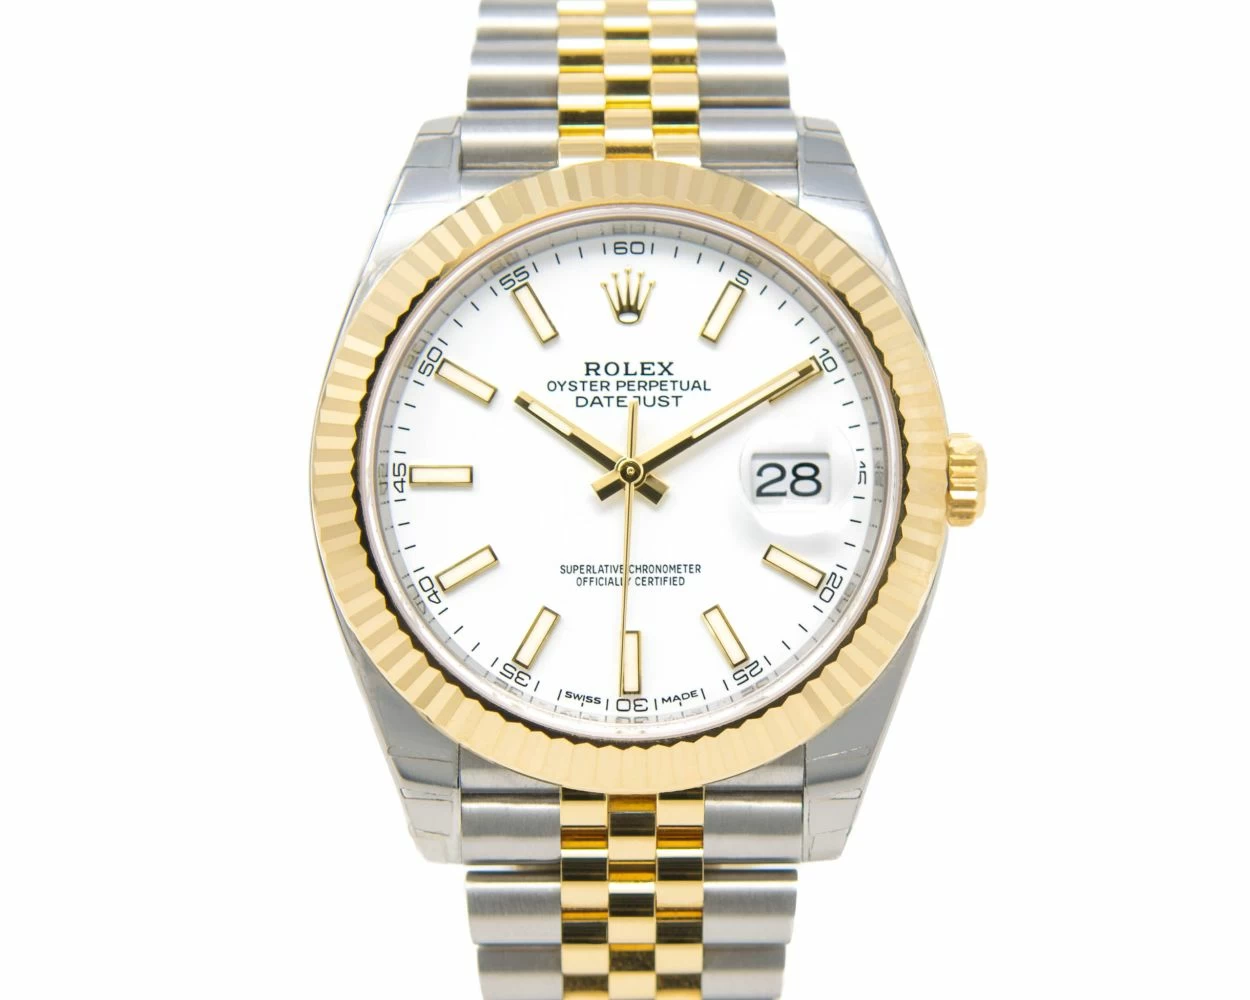 Rolex Datejust 41mm 126333 Stainless Steel & Yellow Gold Watch